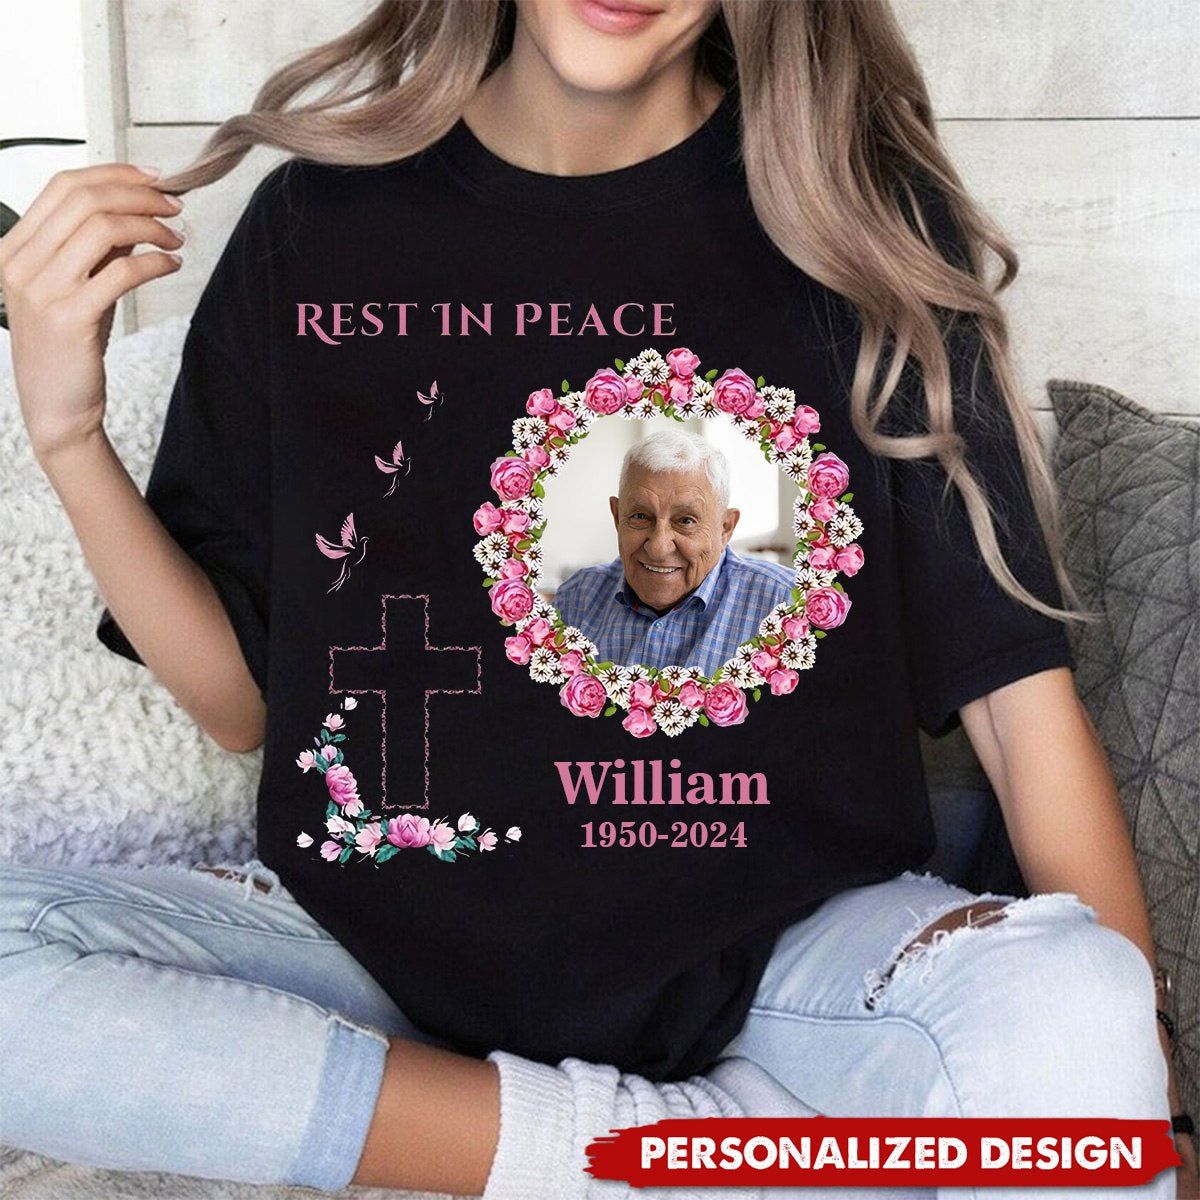 KISSFAITH-Personalized Rest in Peace Memorial T-Shirt